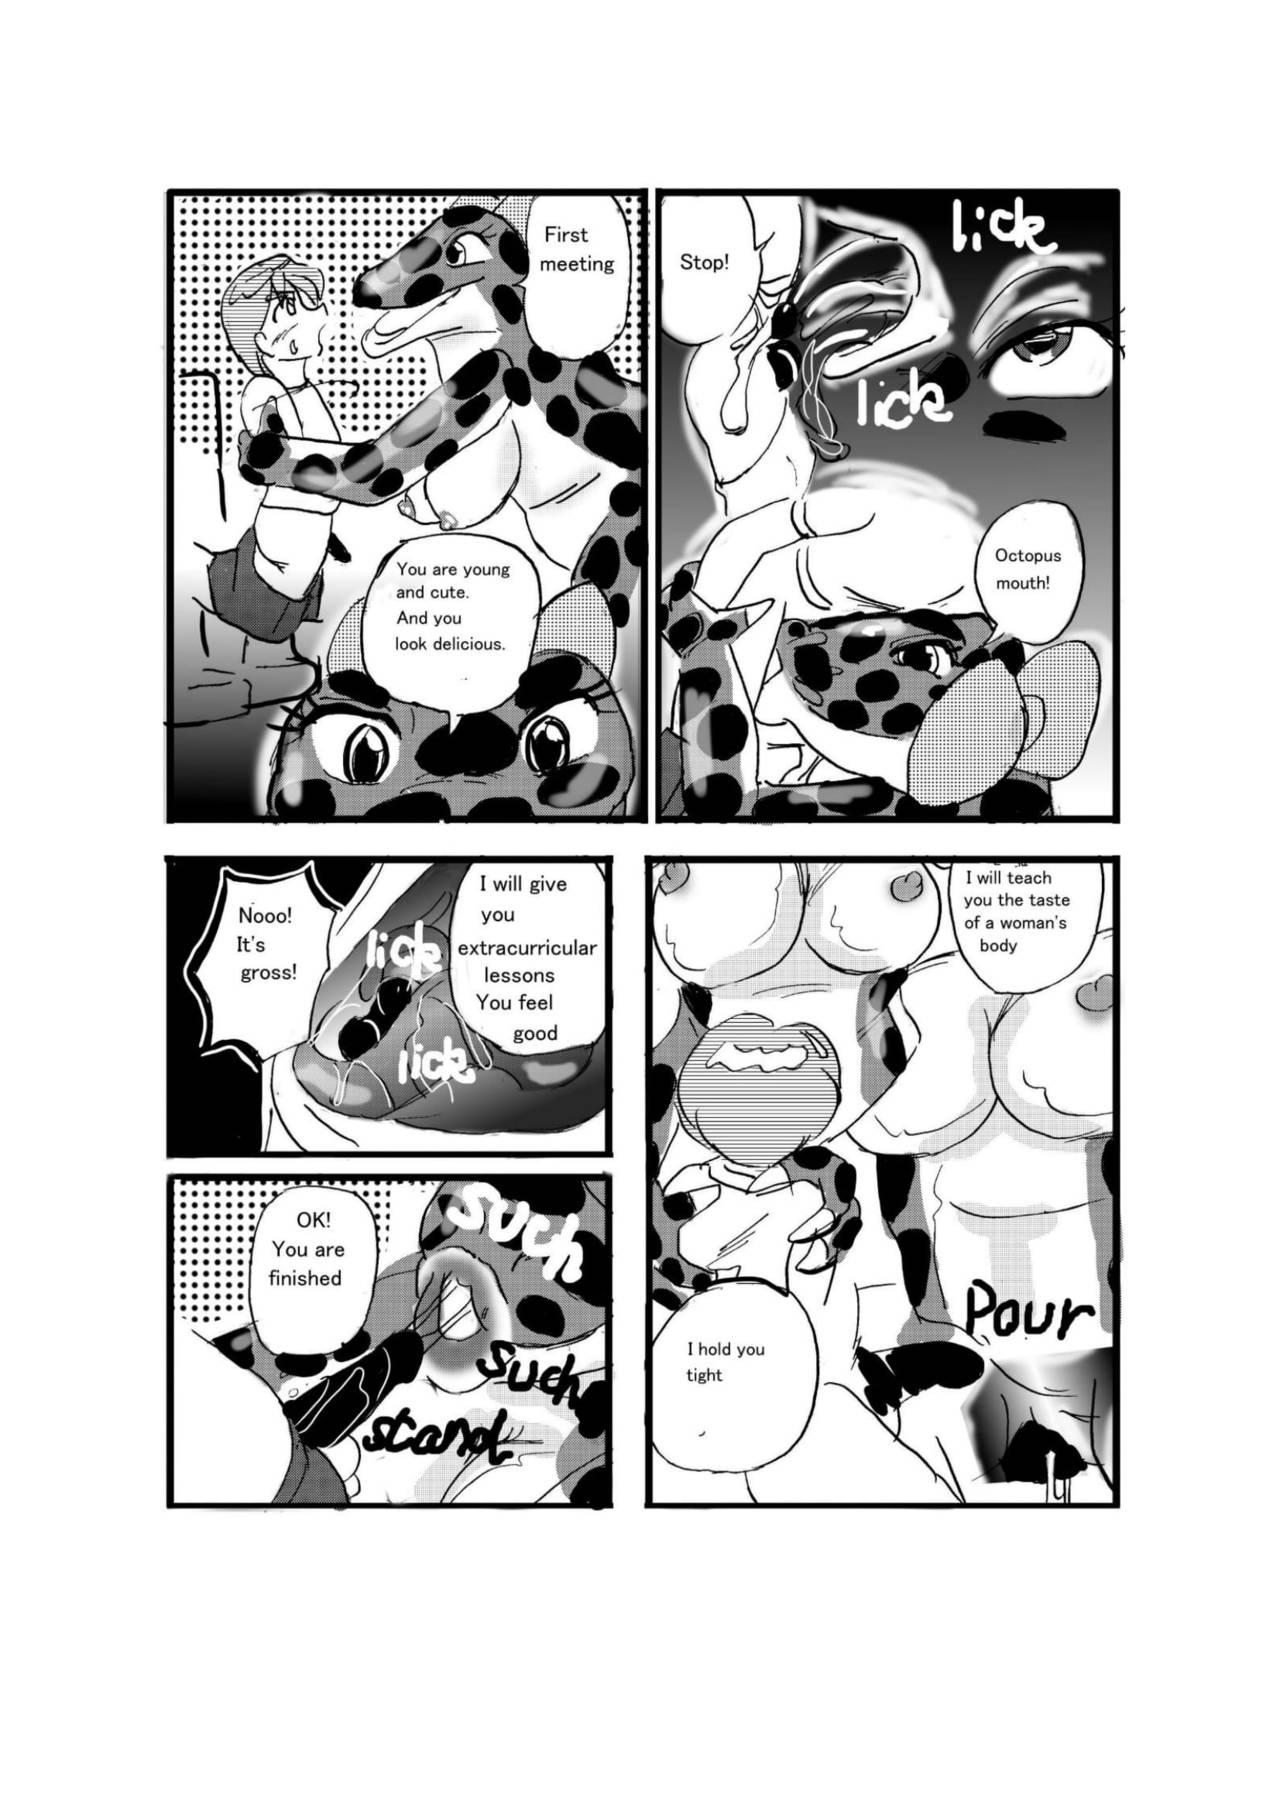 Best Blow Job Swallowed Whole vol.2 Waniko + What's Digestion? - Original Dominate - Page 4